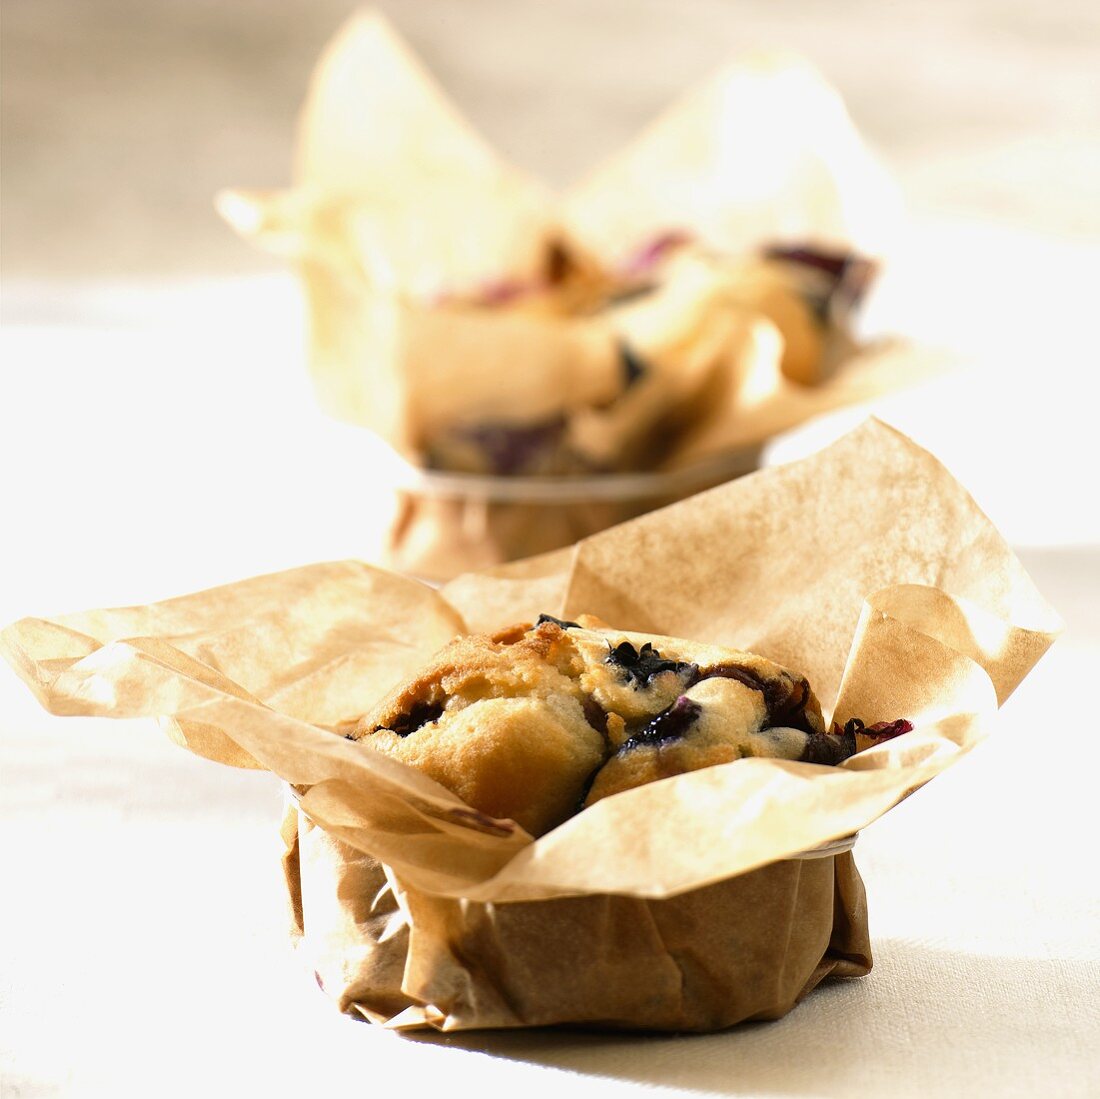 Small blueberry cakes baked in baking parchment